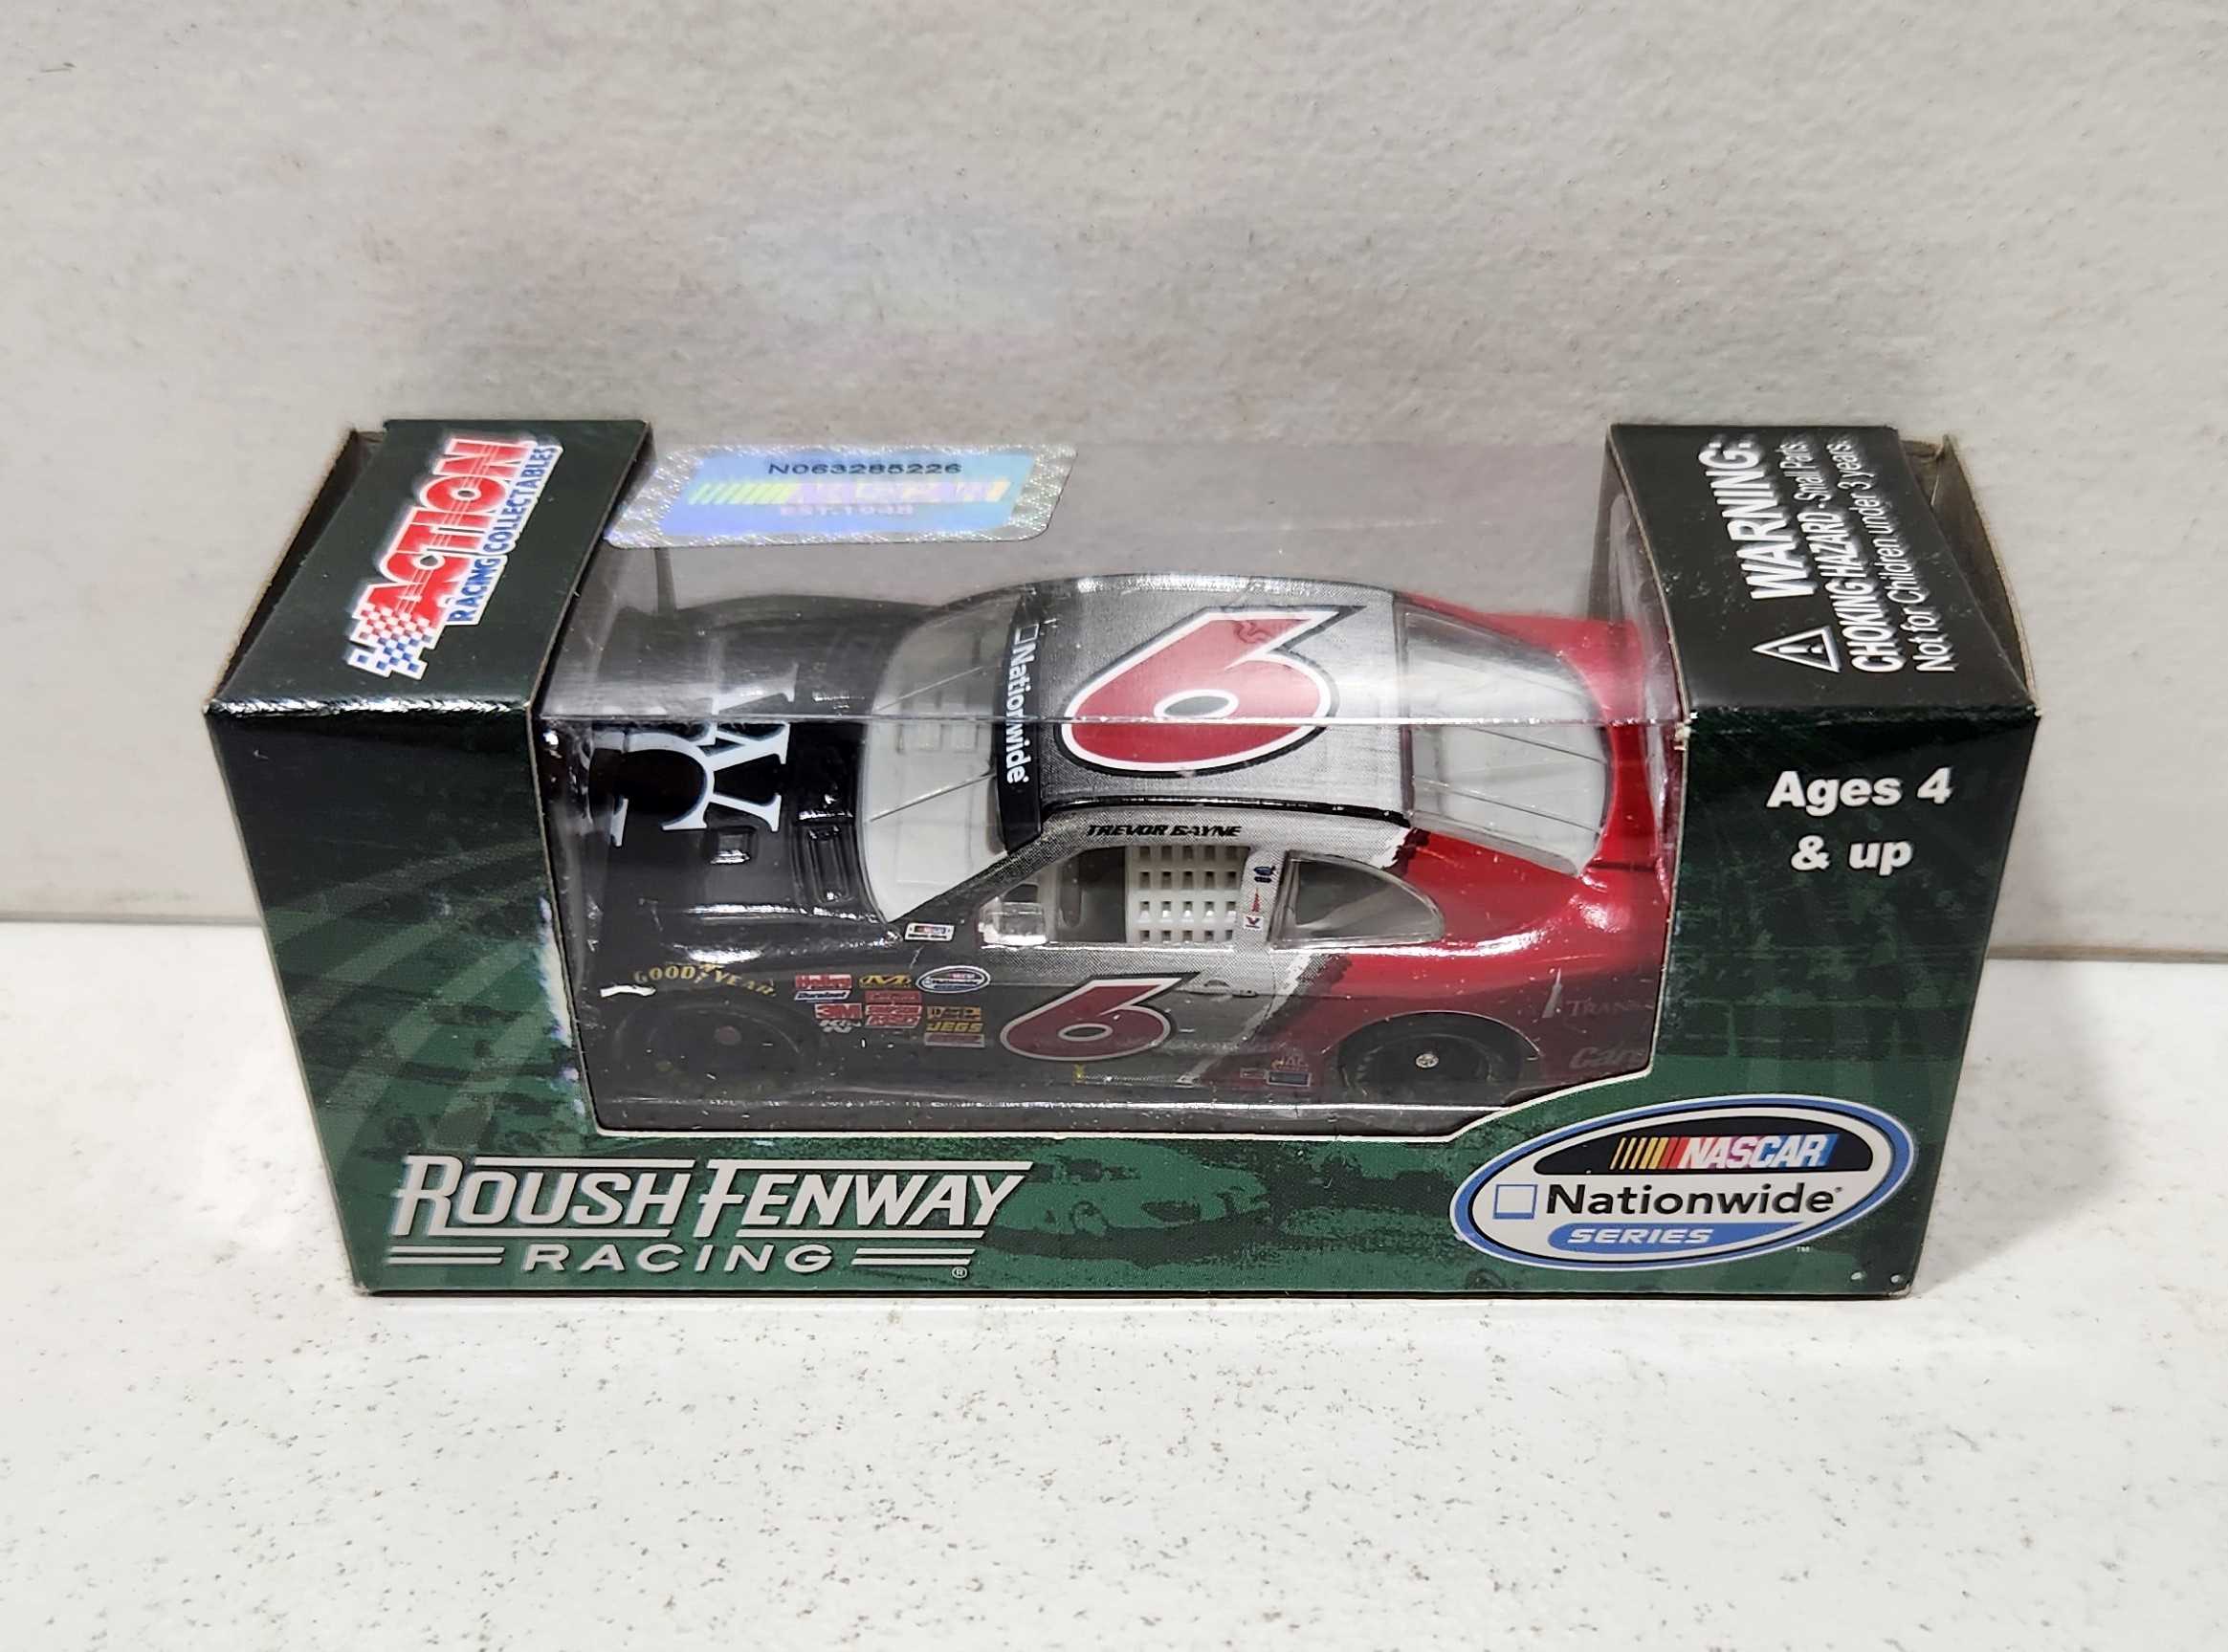 2013 Trevor Bayne 1/64th World Financial Group "Nationwide Series" Pitstop Series Mustang